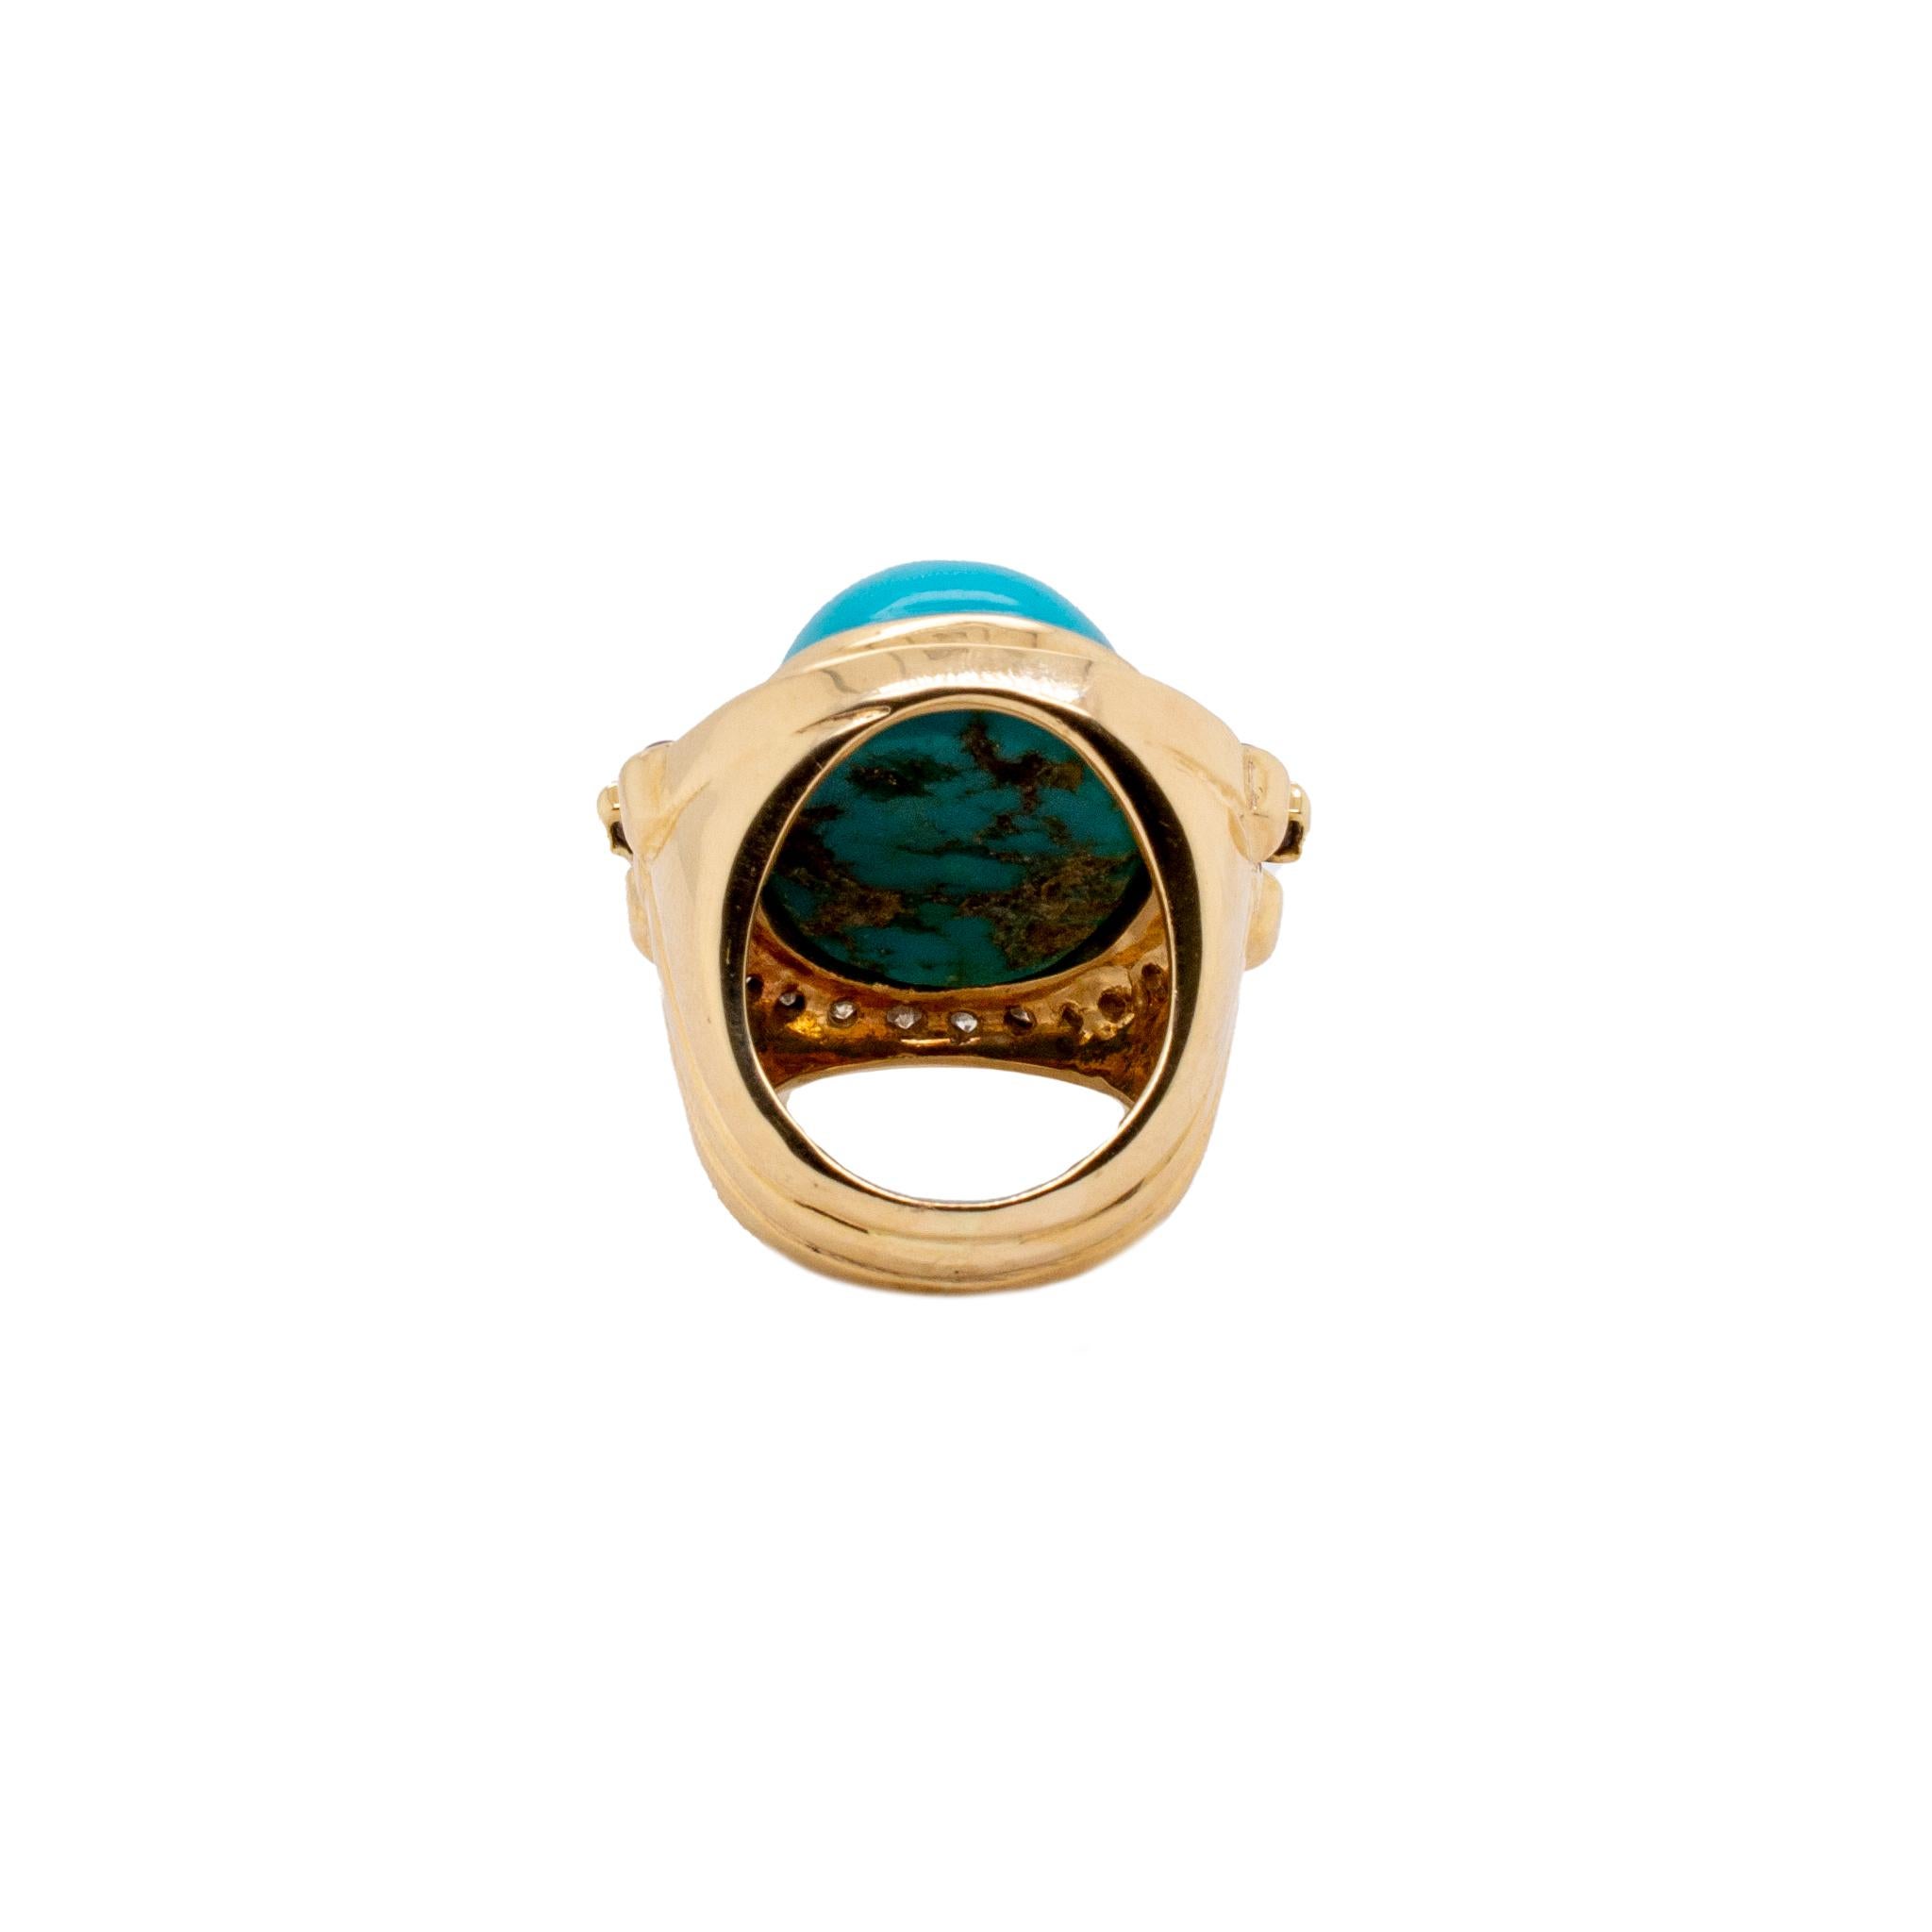 One lady's custom made, hand made textured & polished 14K yellow gold, diamond, turquoise and ruby halo, cocktail, vintage ring with a soft-square shank. The ring is a size 6. The ring weighs a total of 27.80 grams., Engraved with 